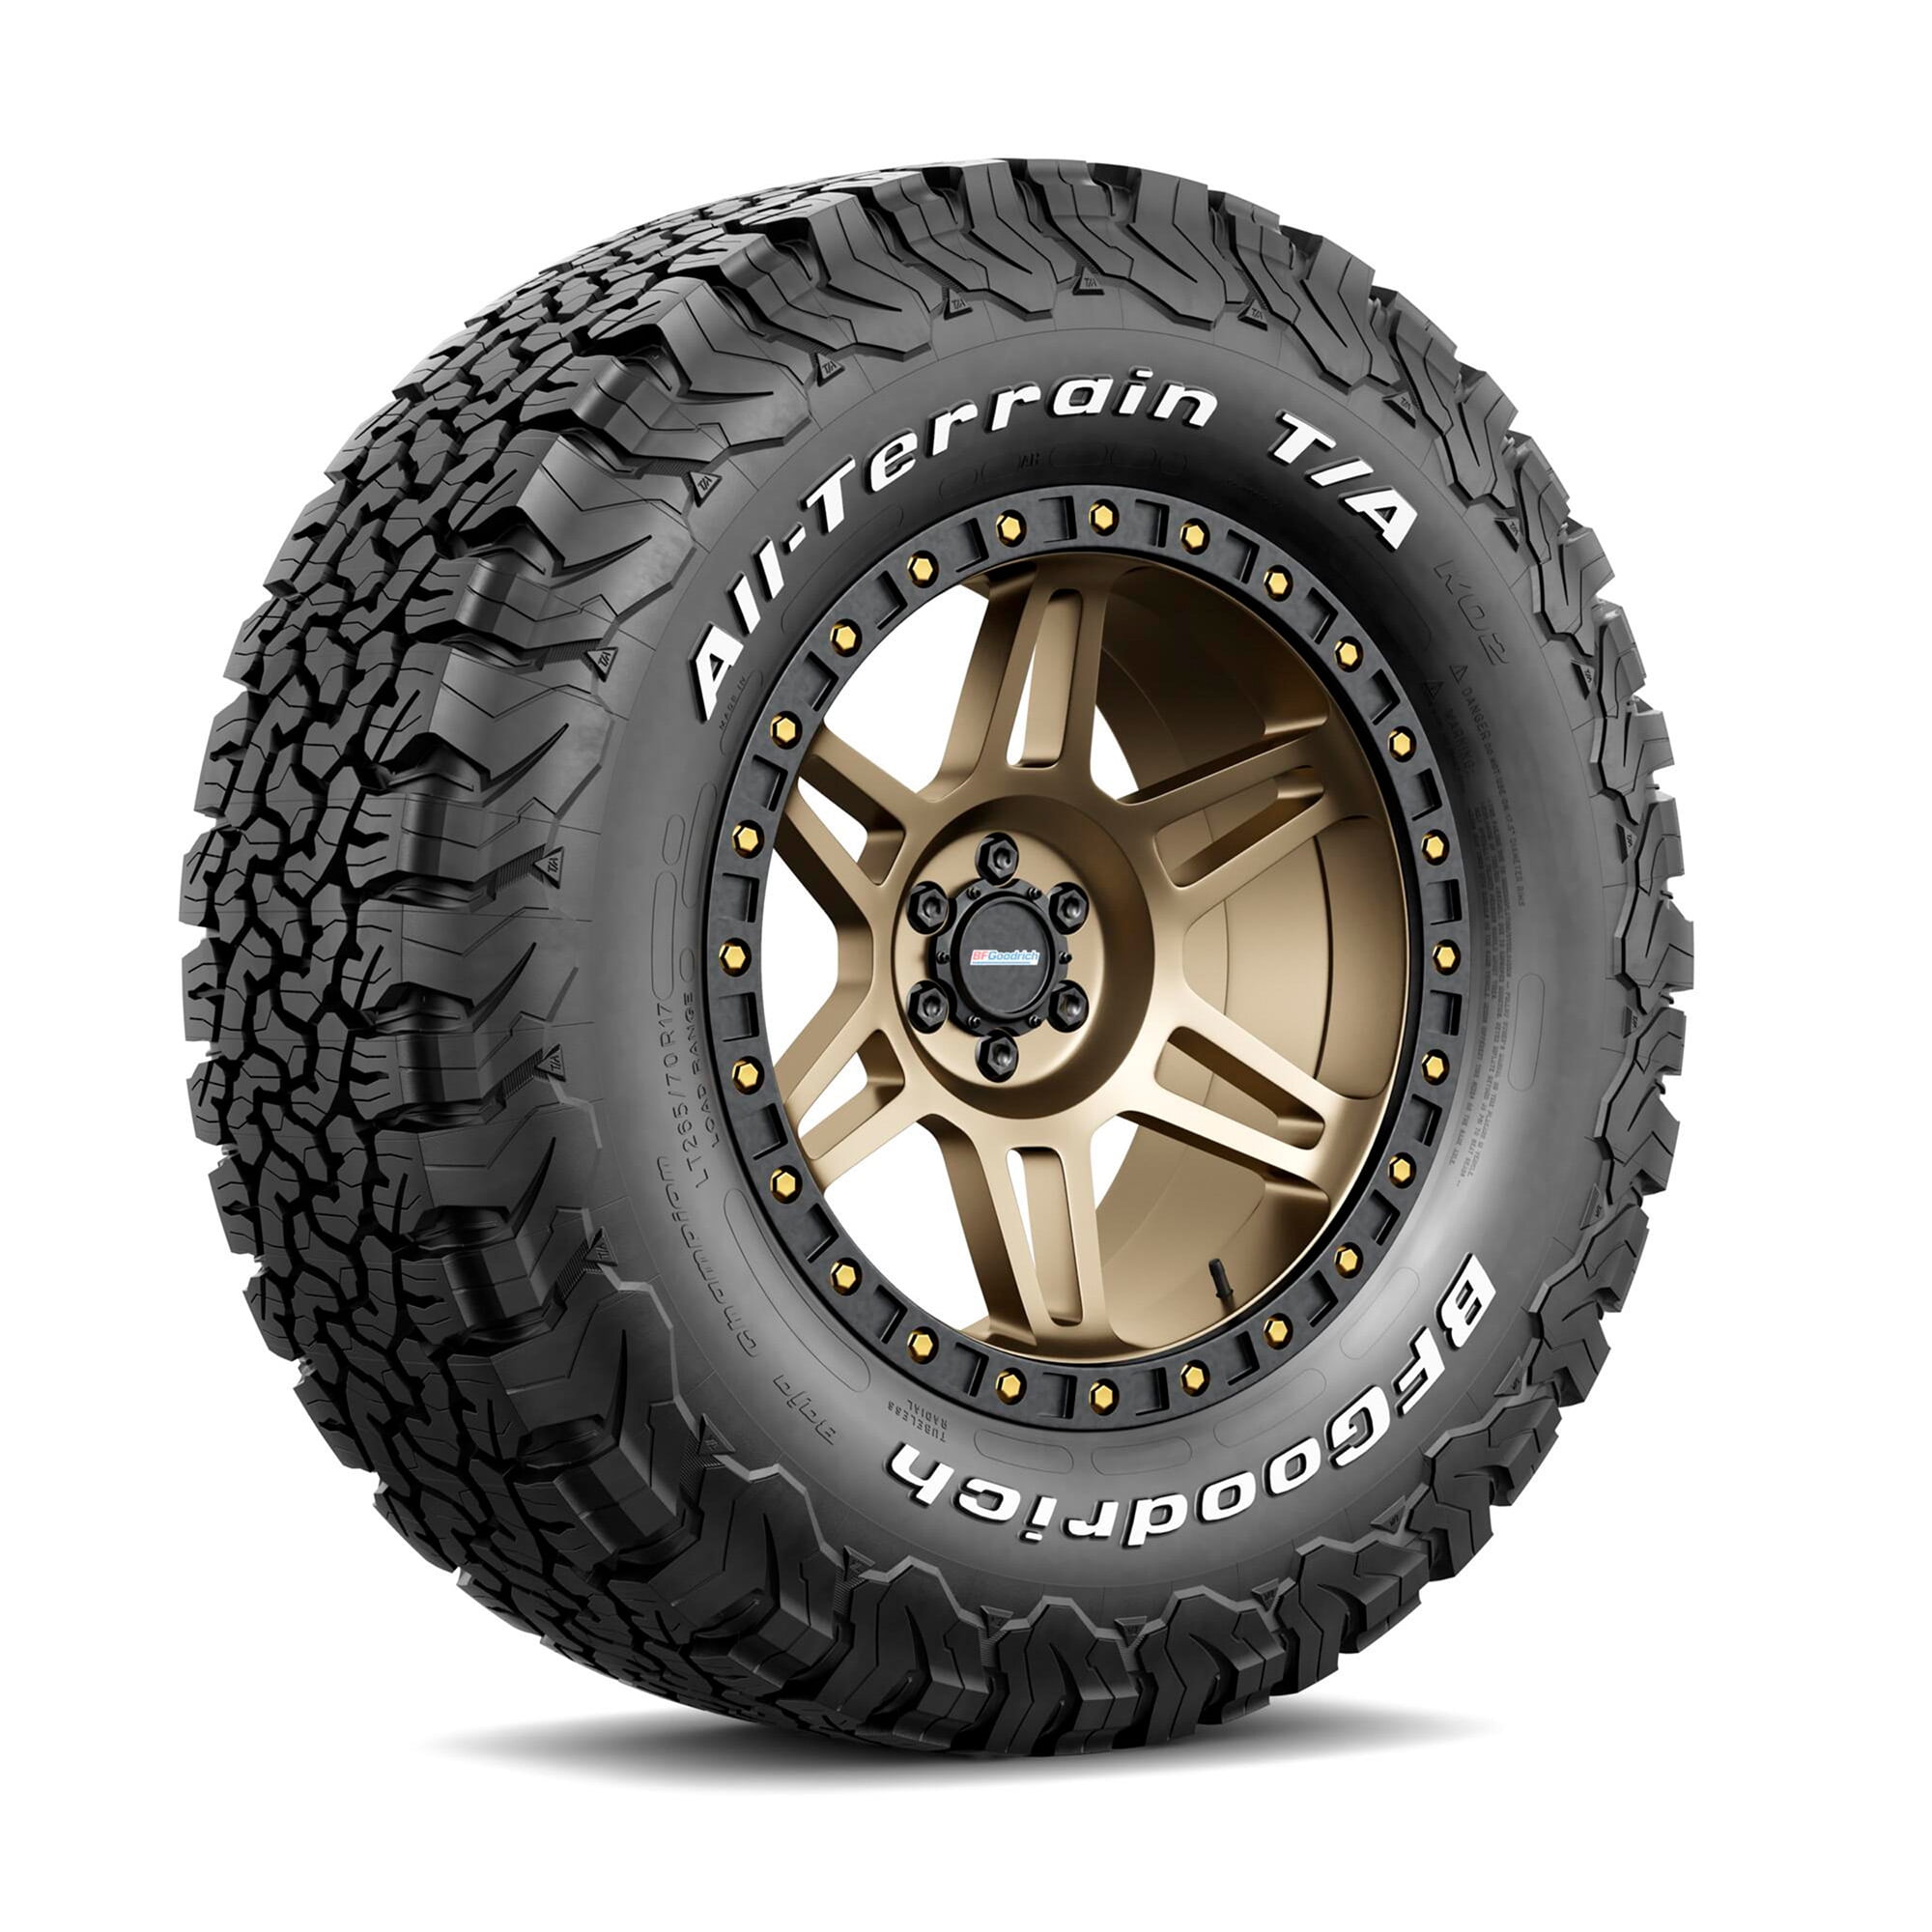 LT265/75R16/E 123Q BFGoodrich Commercial T/A Traction Winter Radial Tire 